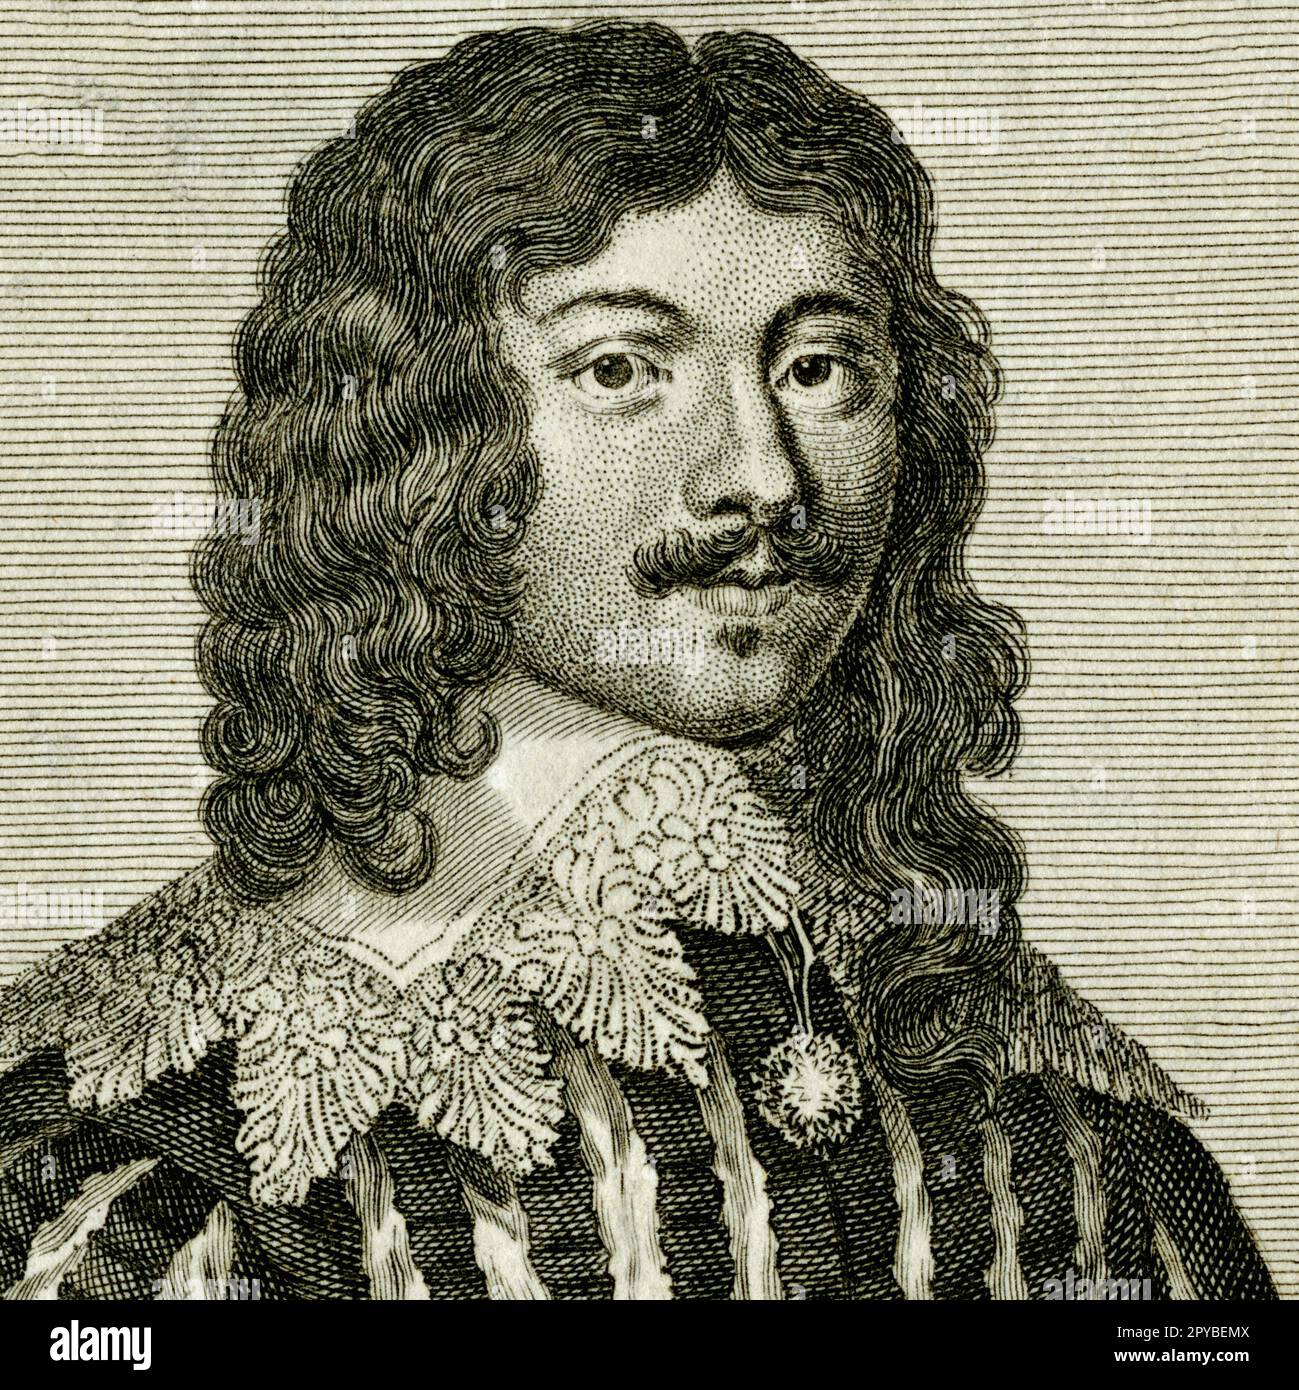 Lucius Cary (1610-1643), 2nd Viscount Falkland, author, idealist, intellectual and politician, who despite being a man of peace fought and died for the royalist cause in the first English Civil War. Square detail of engraving created in the 1700s by Guillaume Philippe Benoist (1725-1770), after a portrait by an unknown artist. Stock Photo